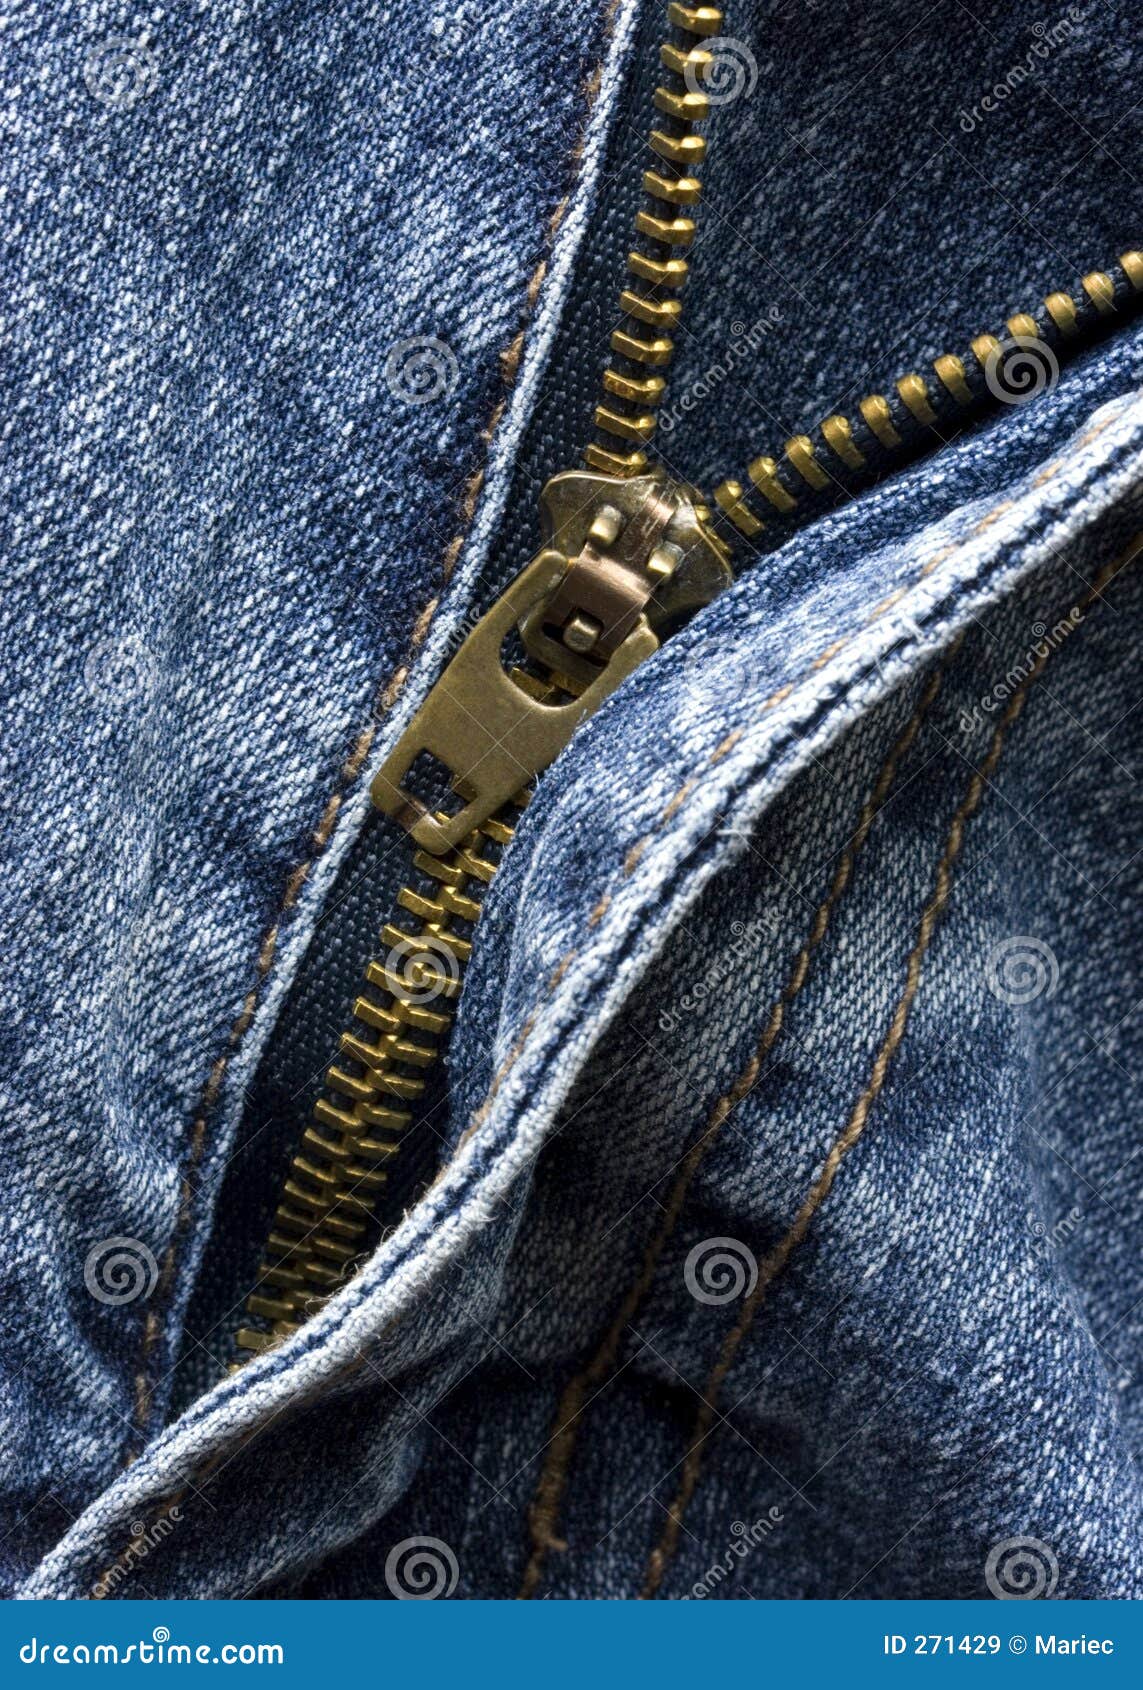 The Zip In A Pair Of Jeans Royalty Free Stock Images - Image: 271429